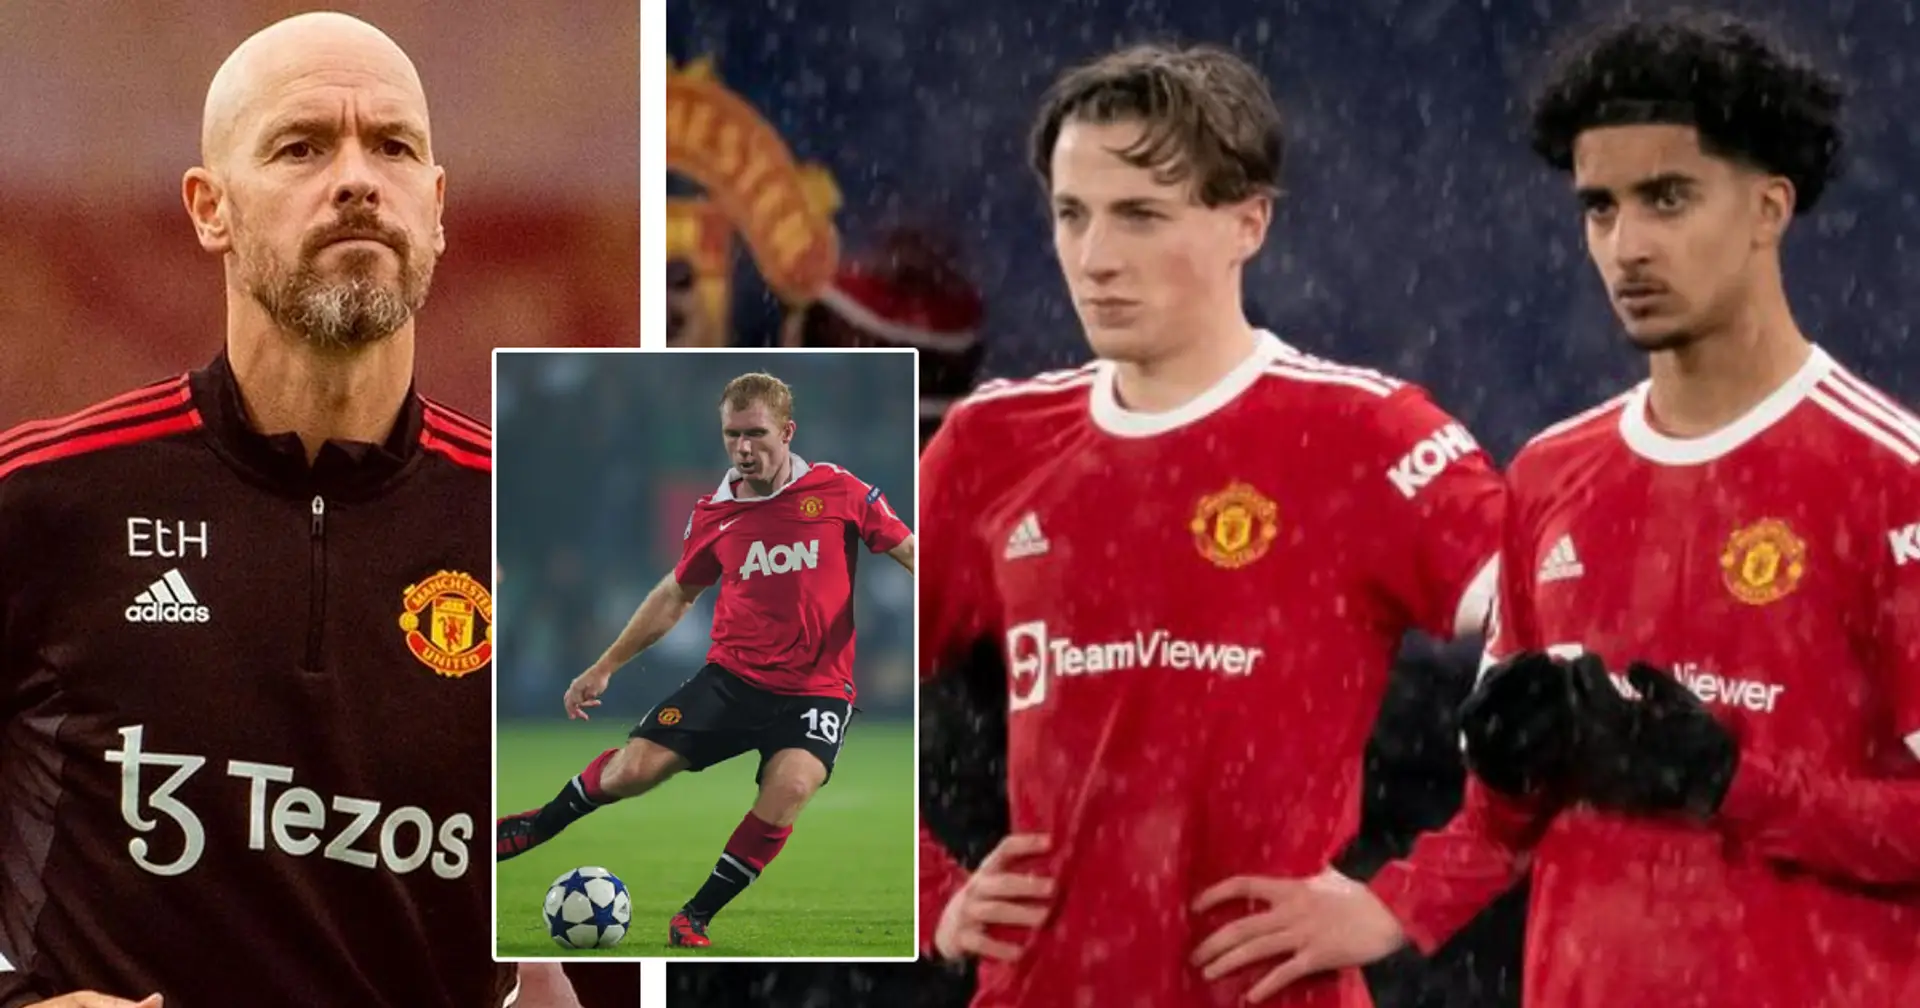 'Looks like daddy made him watch Scholes videos': United fans impressed with one youngster in pre-season tour